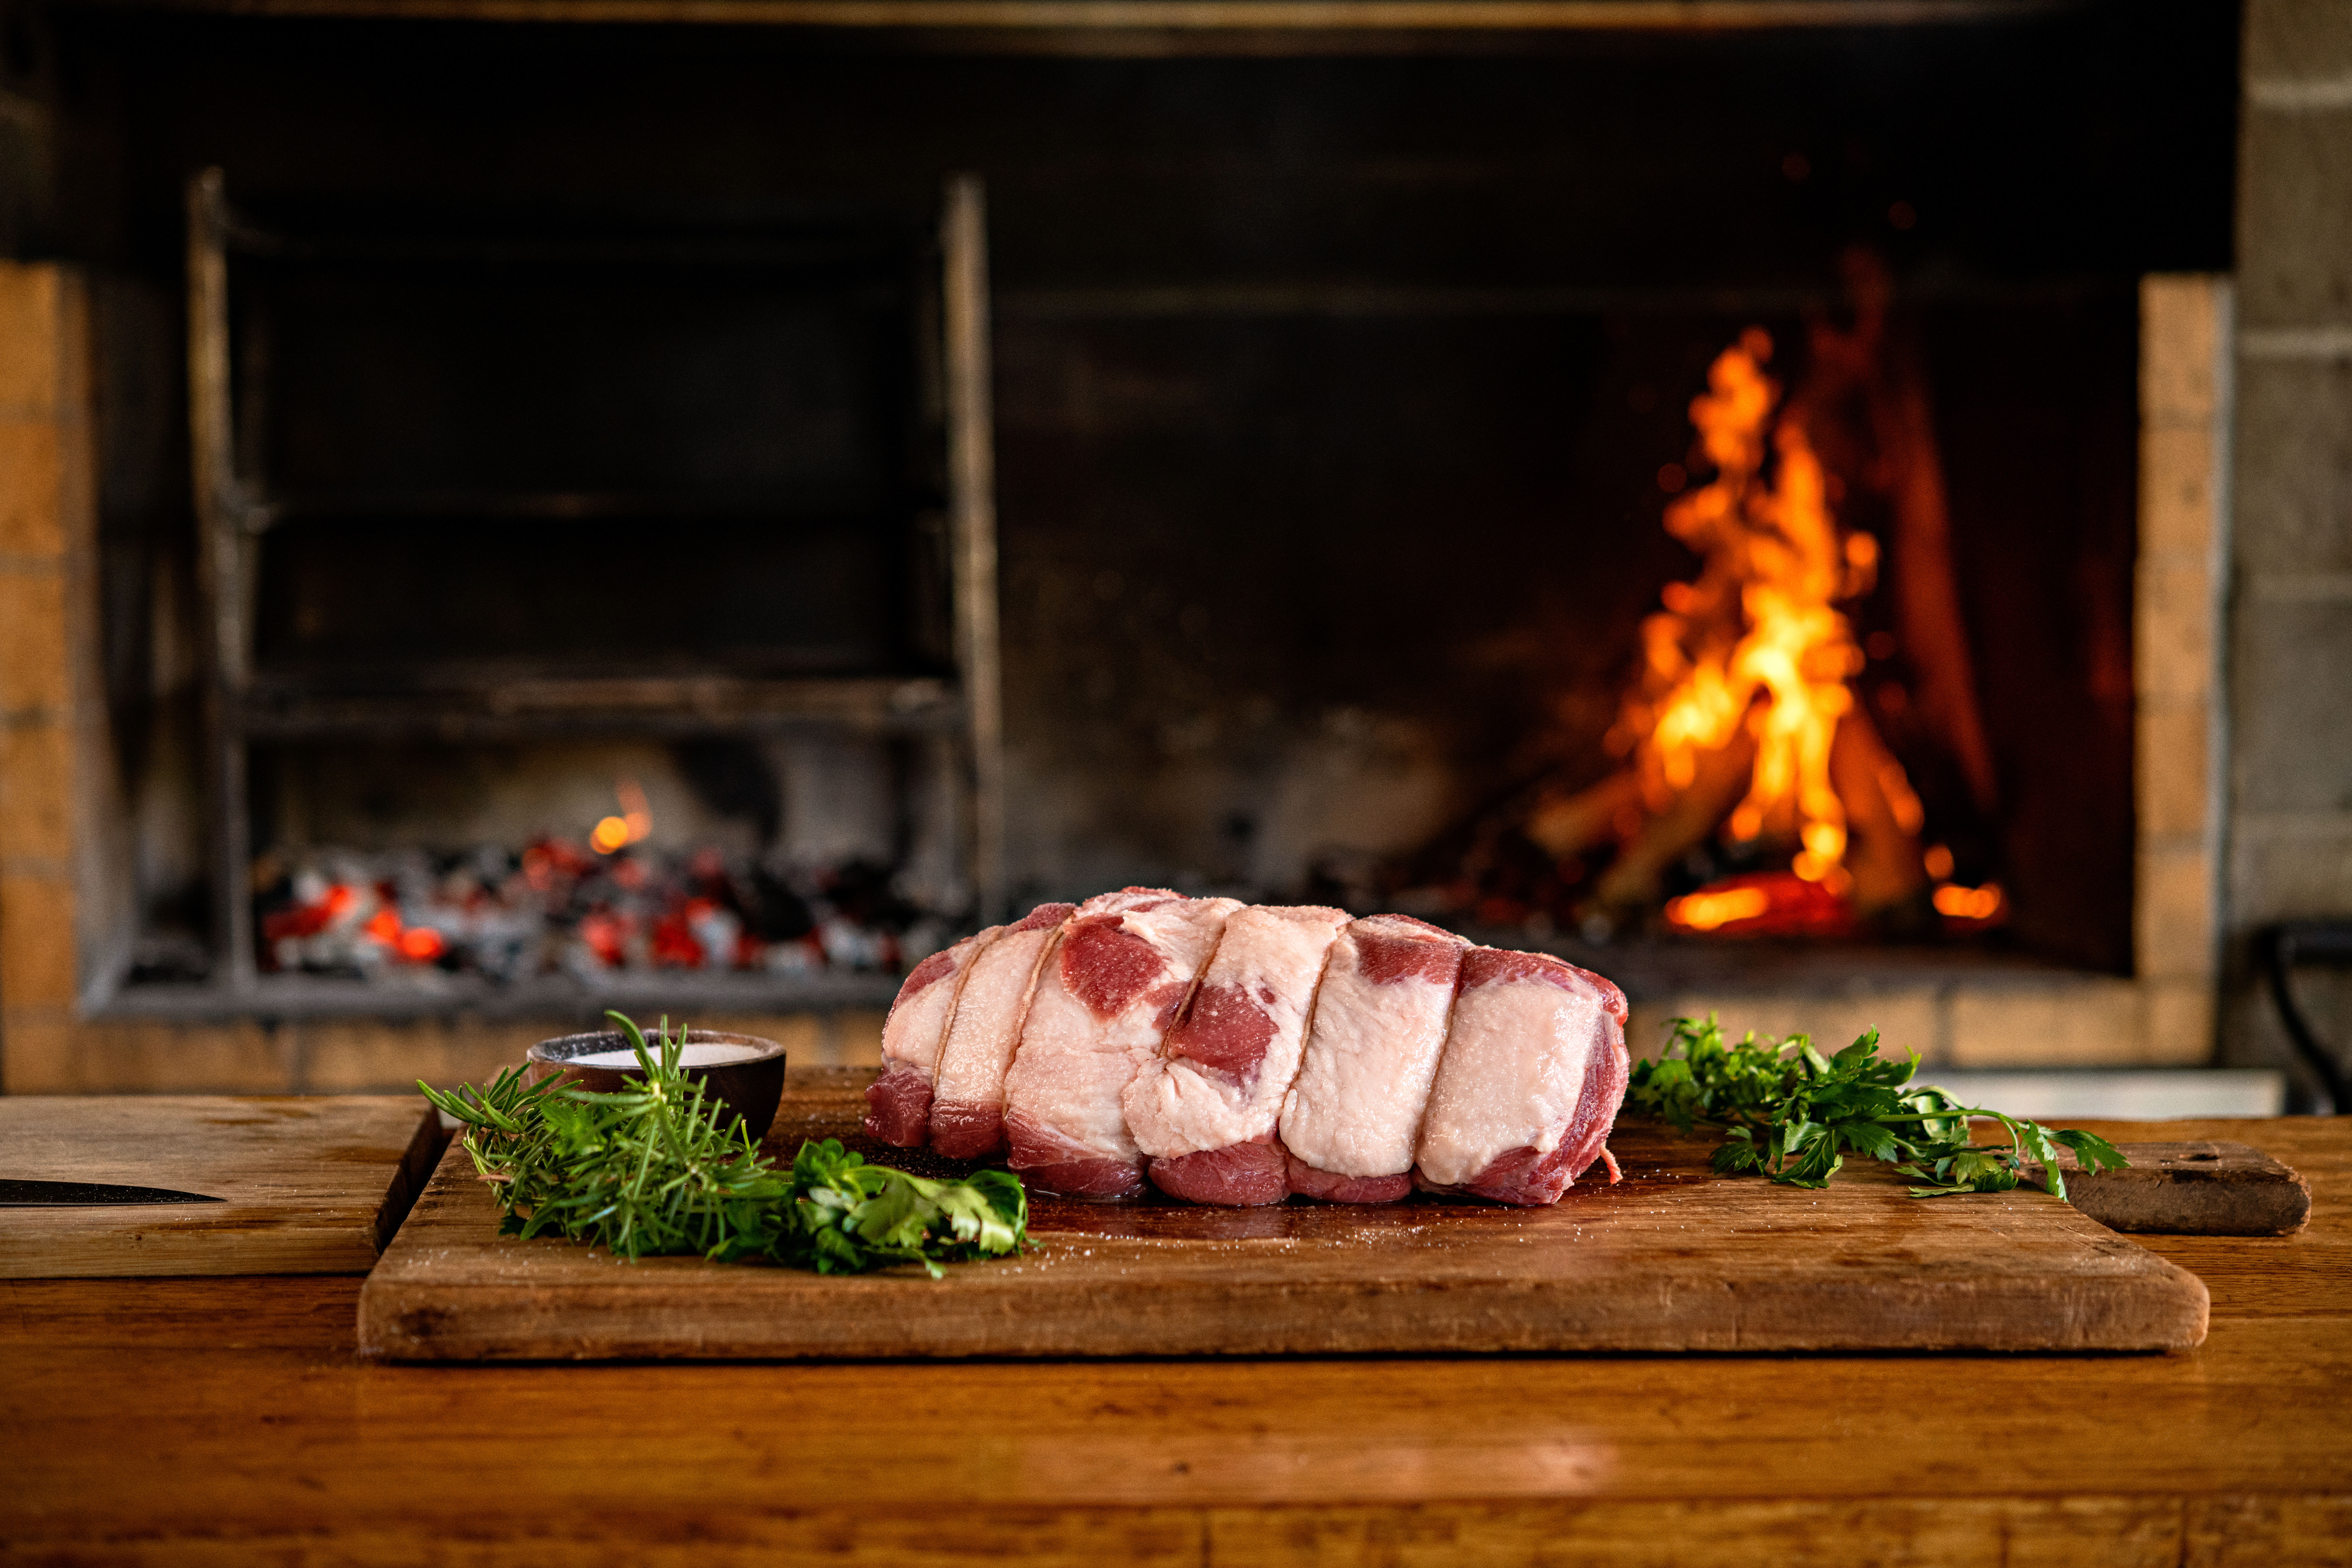 An elegant pork loin roast, wrapped in twine, ready to cook, sitting next to the fire.